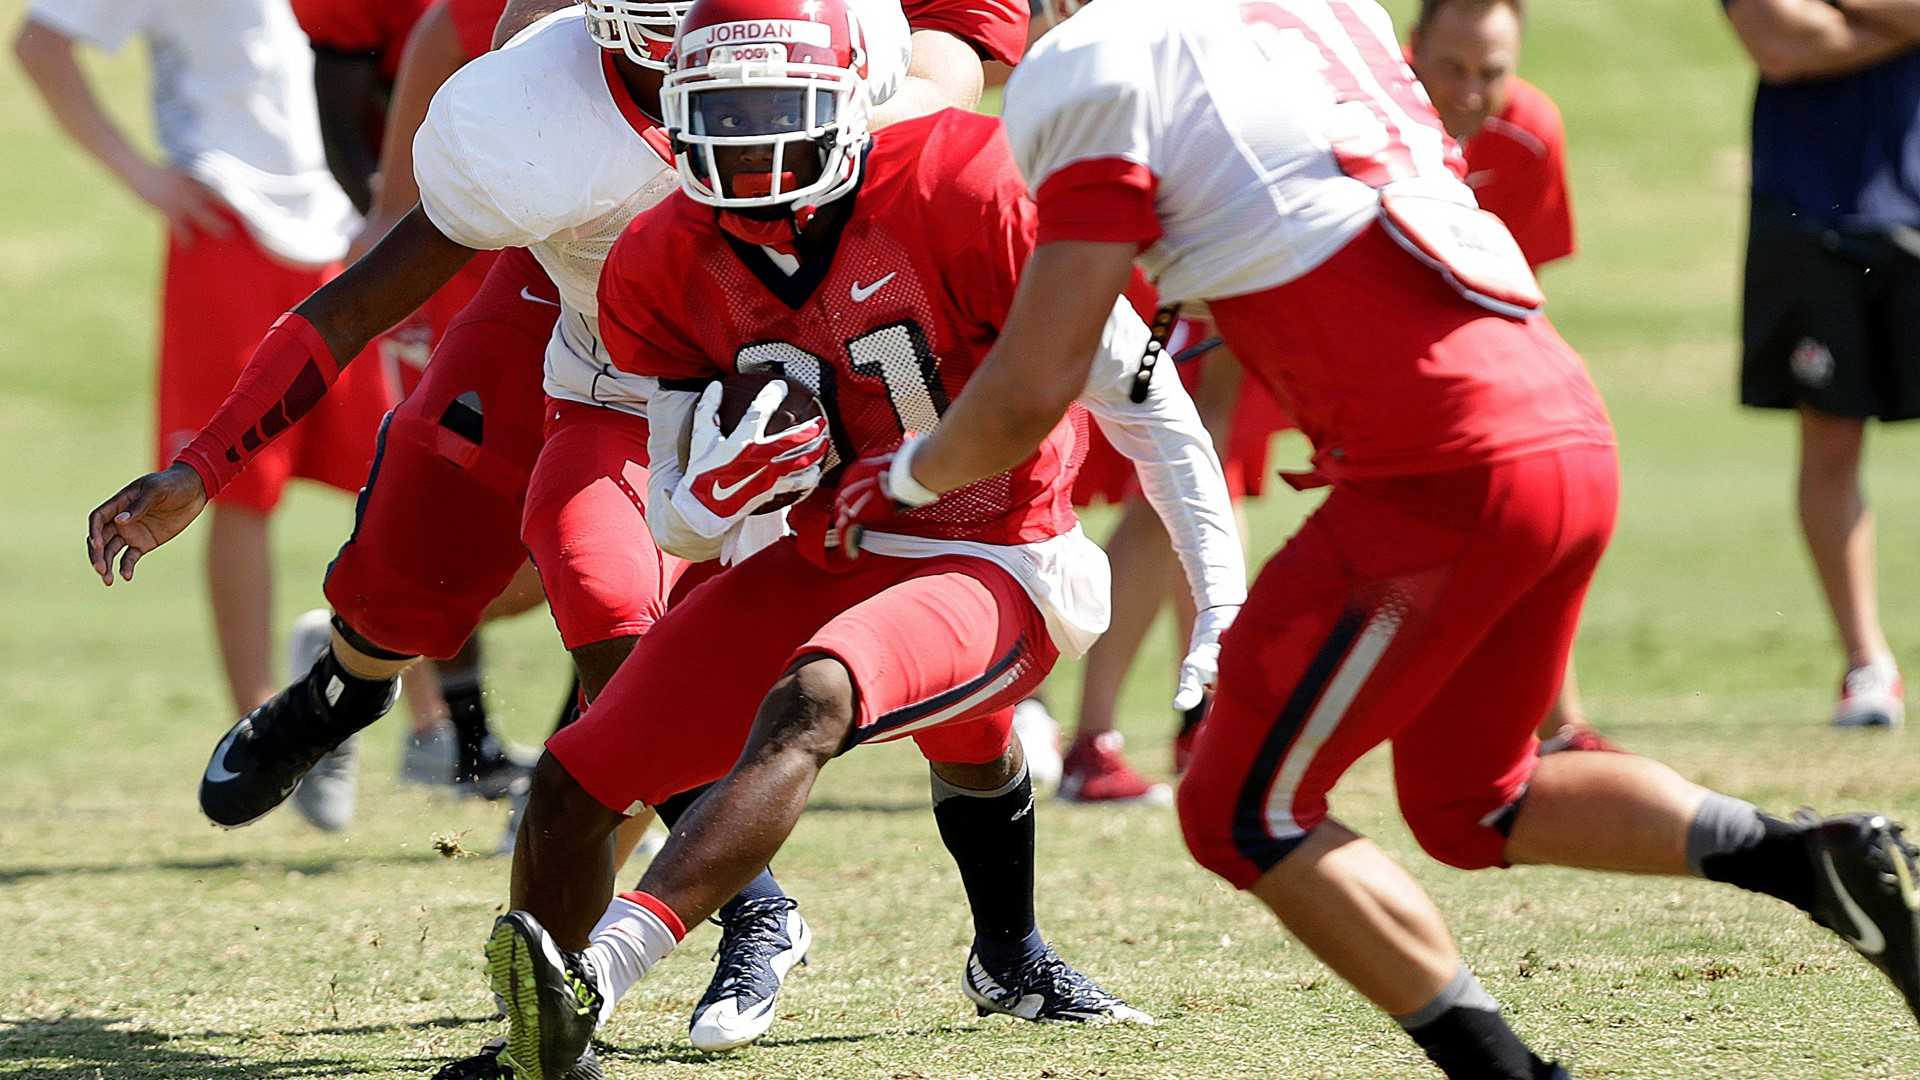 Running back Dontel James rushes through the defense during a practice on Aug. 16. (Fresno State Athletics)